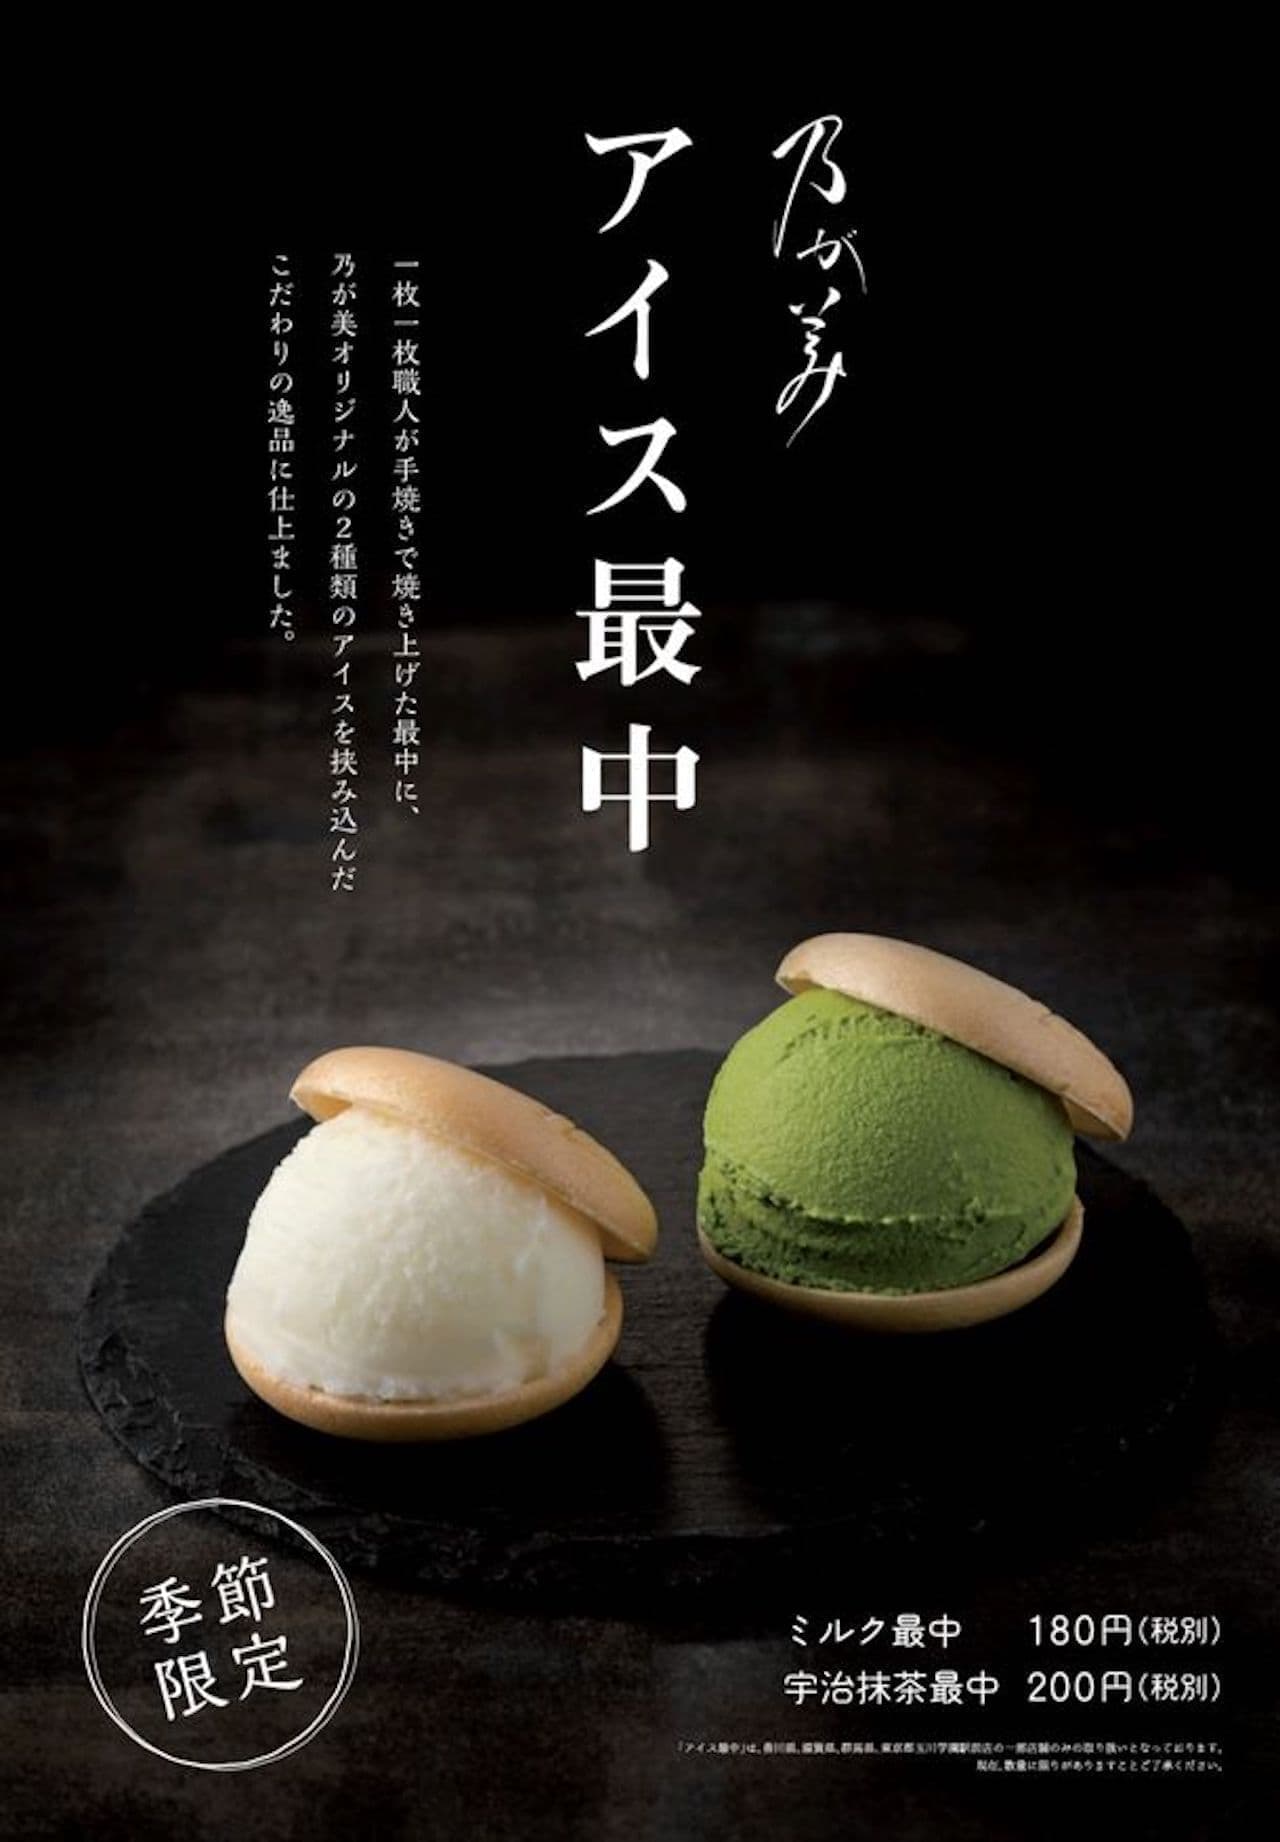 Summer-only "Ice Cream Monaka" from Nogami